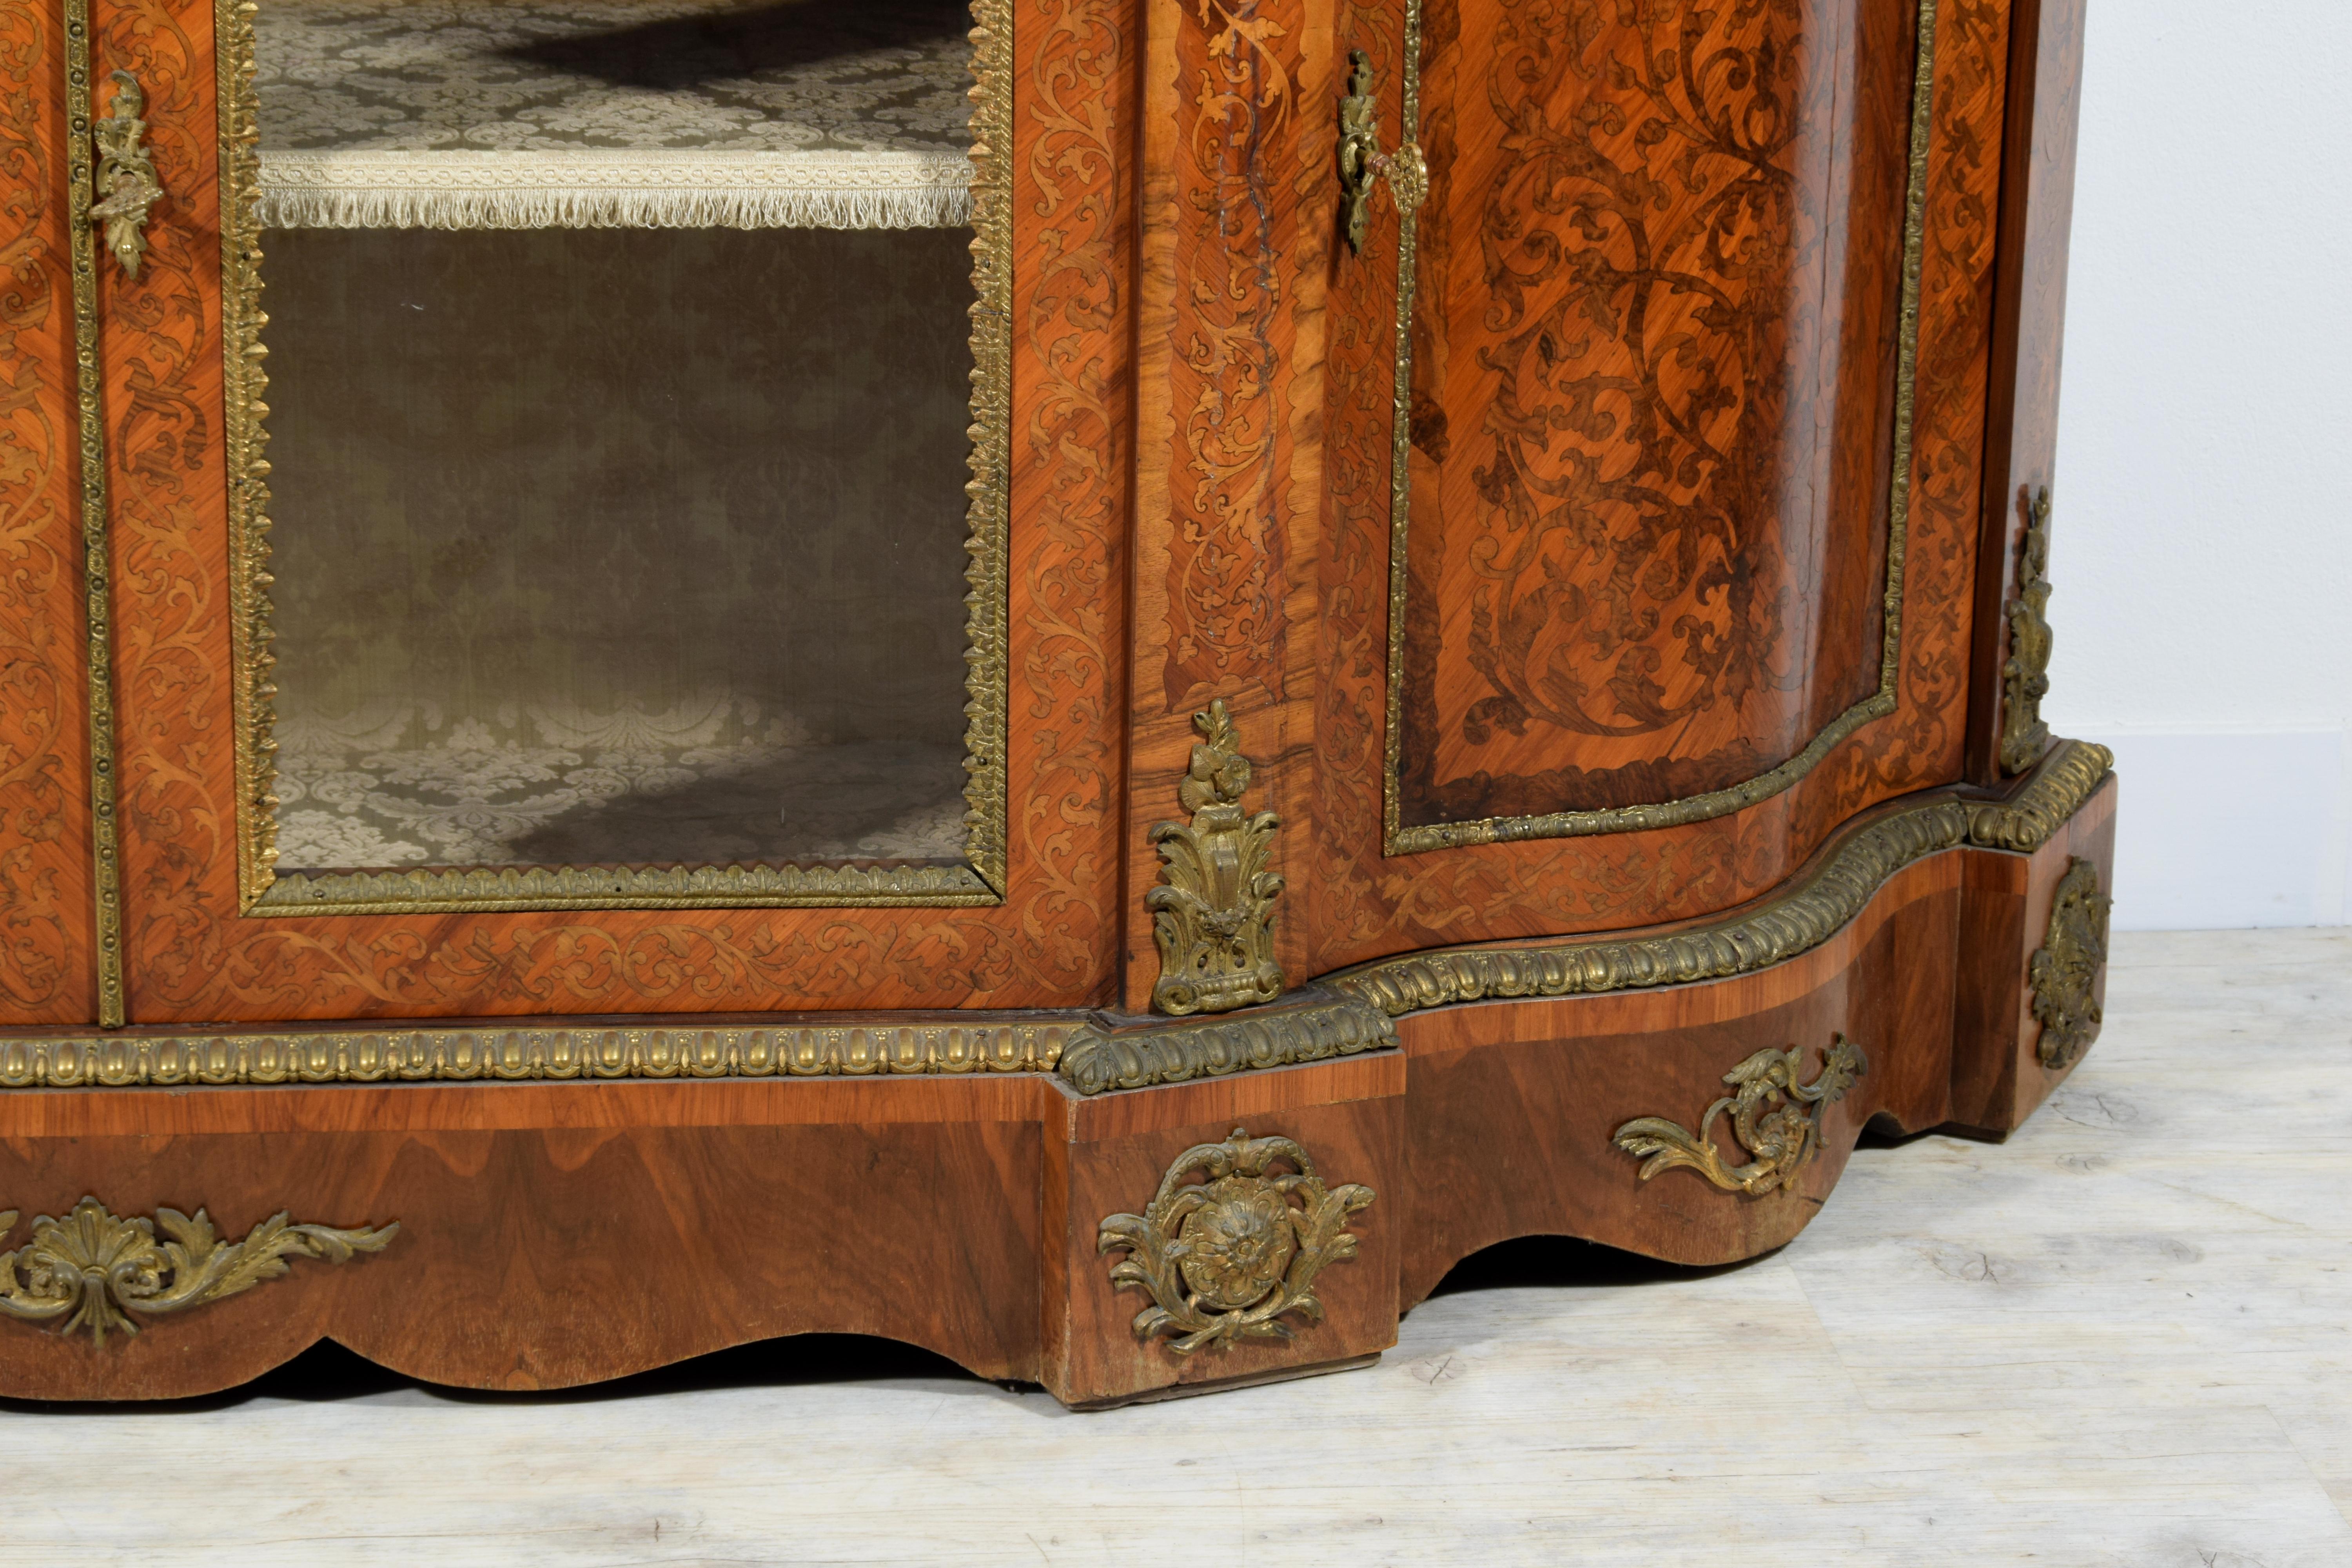 19th Century, English Inlaid Wood Sideboard with Gilt Bronzes 6